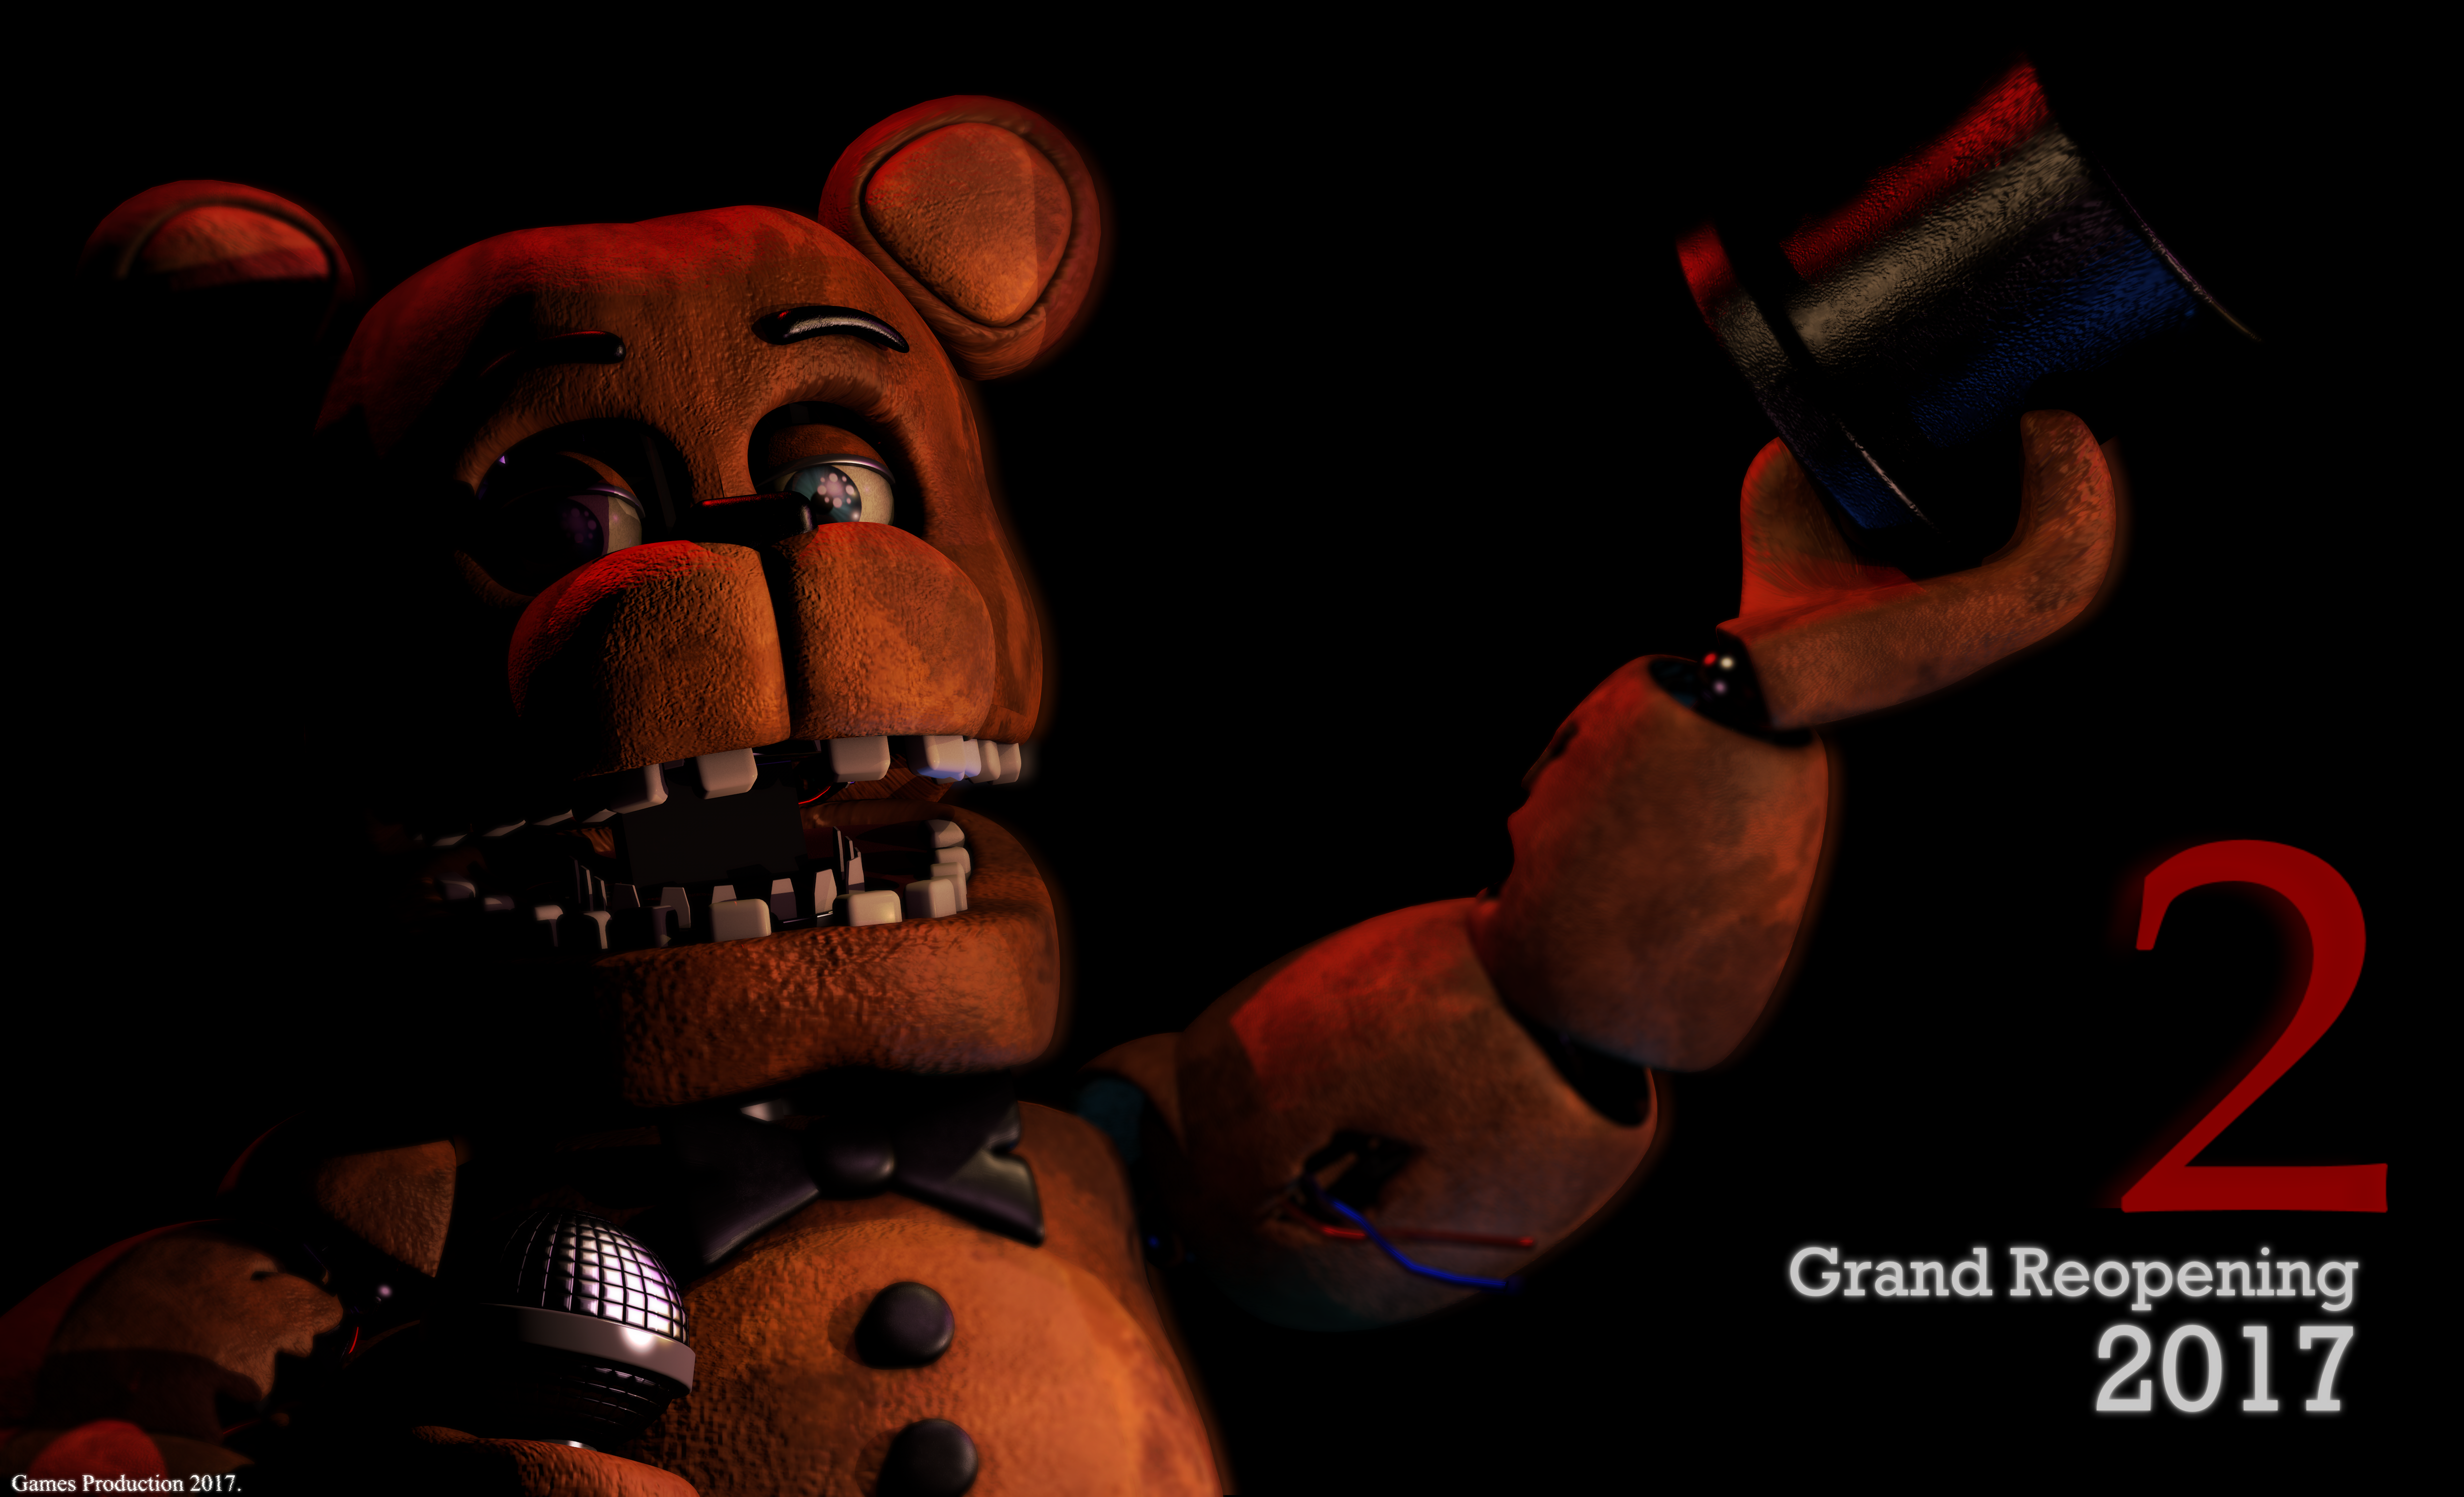 Five Nights At Freddy's 2 4k Ultra HD Wallpaper. Background Image